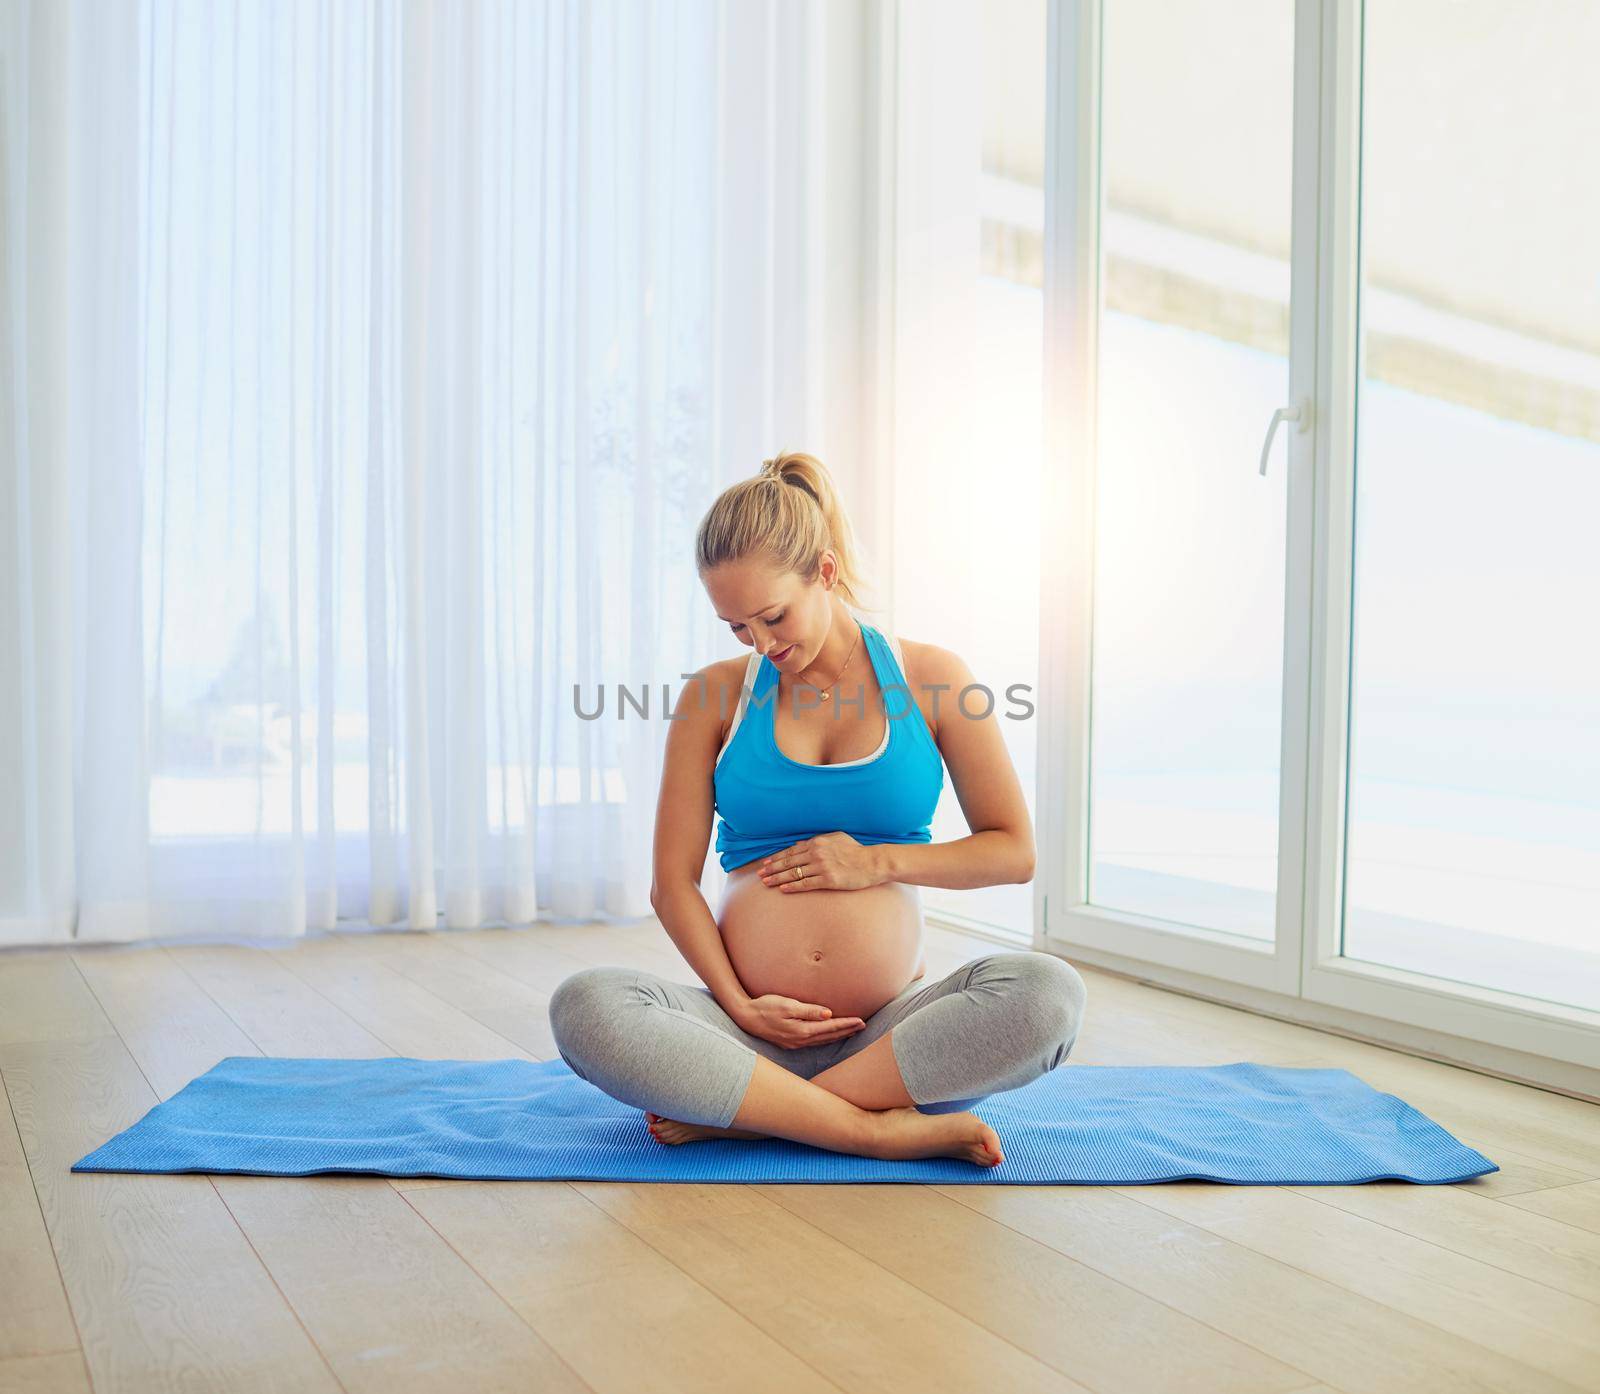 Baby loves it when she works out. a pregnant woman working out on an exercise mat at home